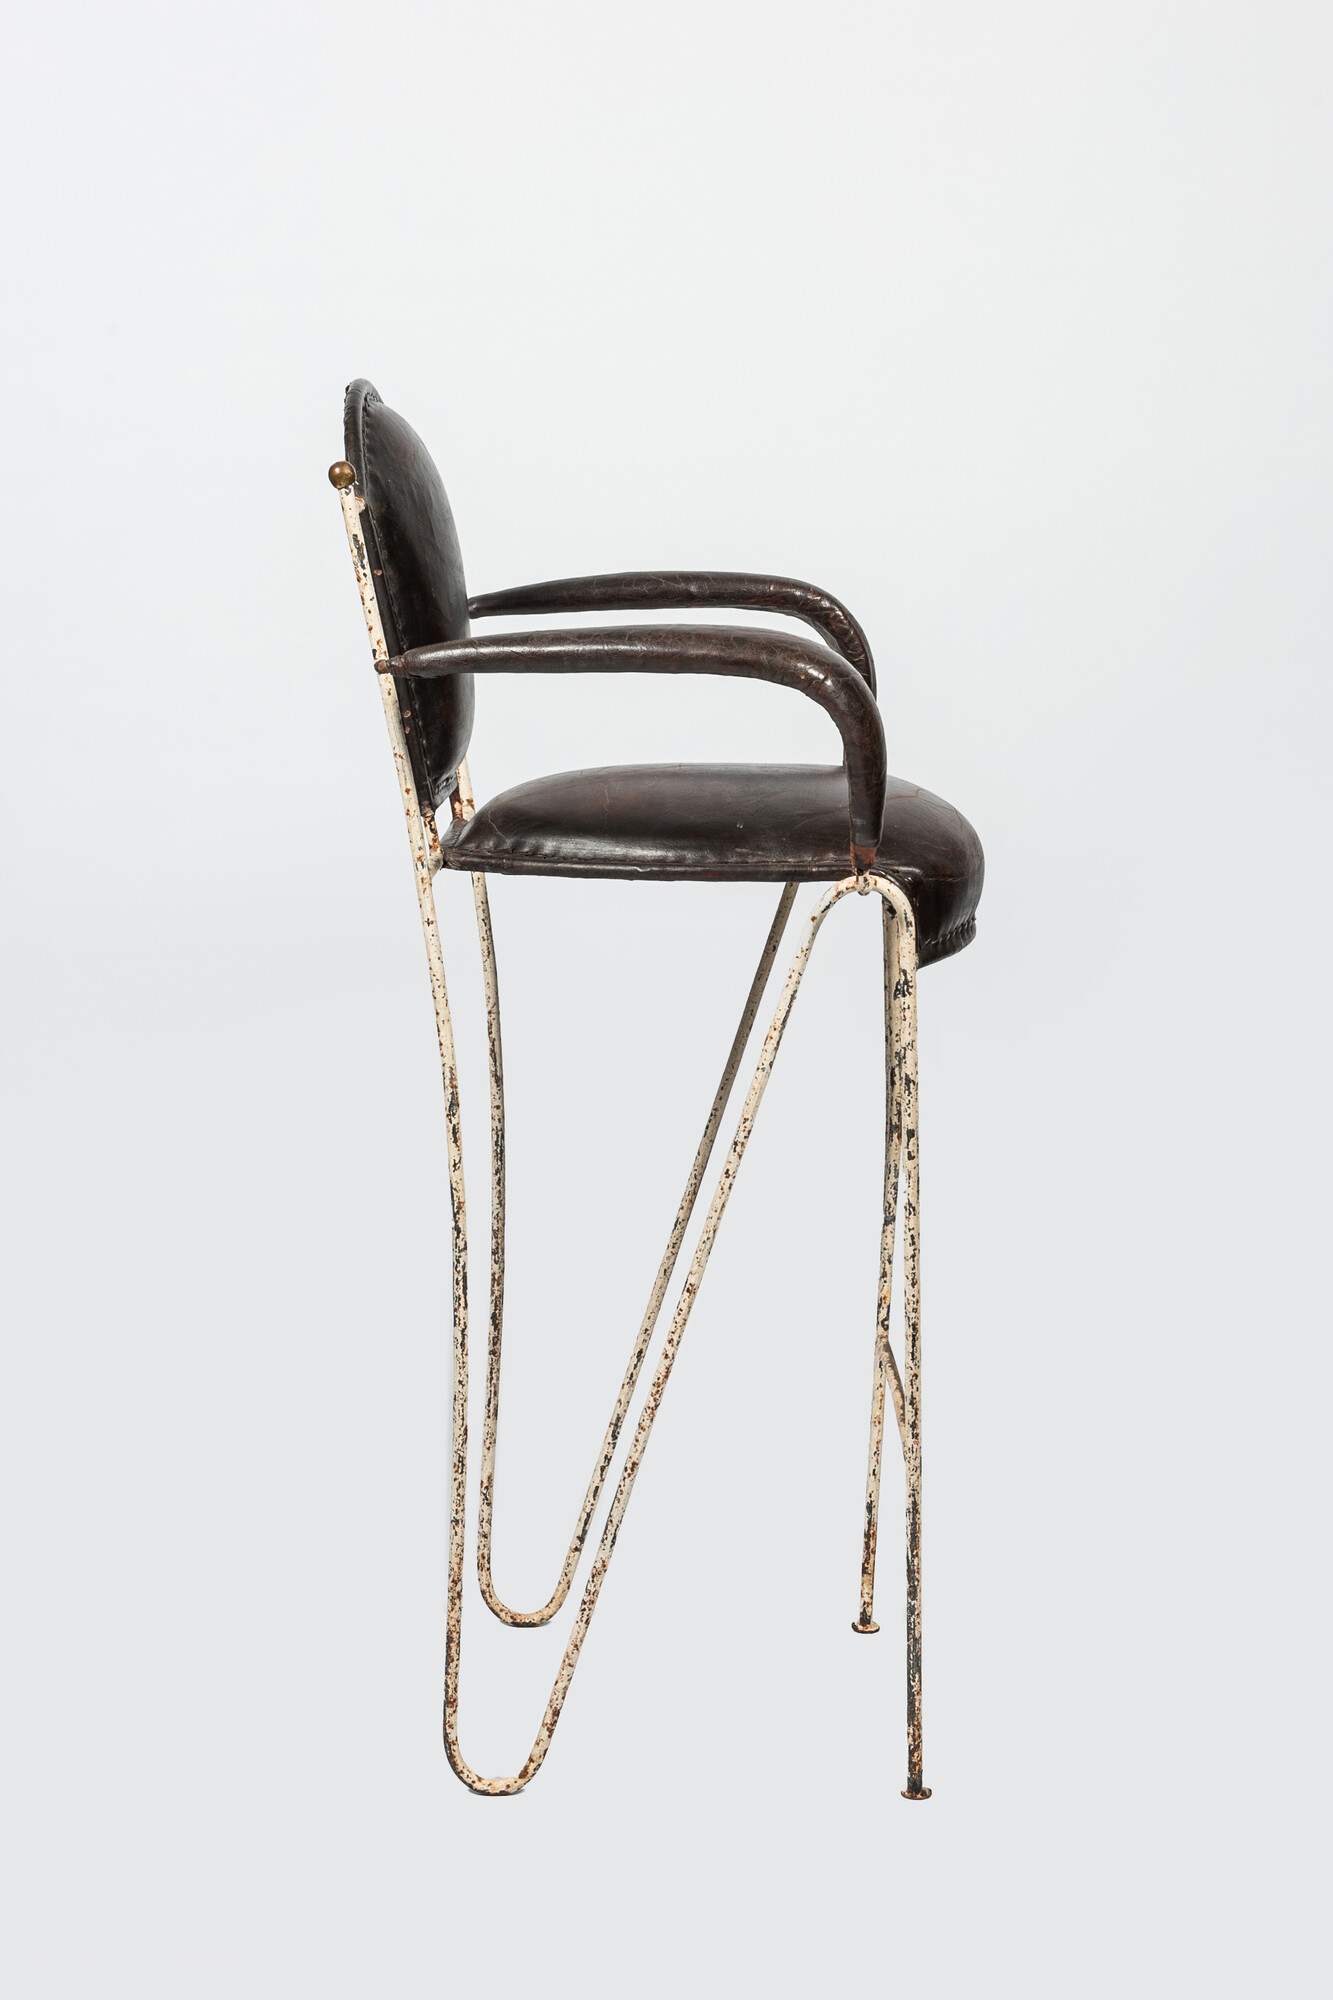 A decorative bar chair in leather and patinated metal, 20th C. - Image 2 of 2